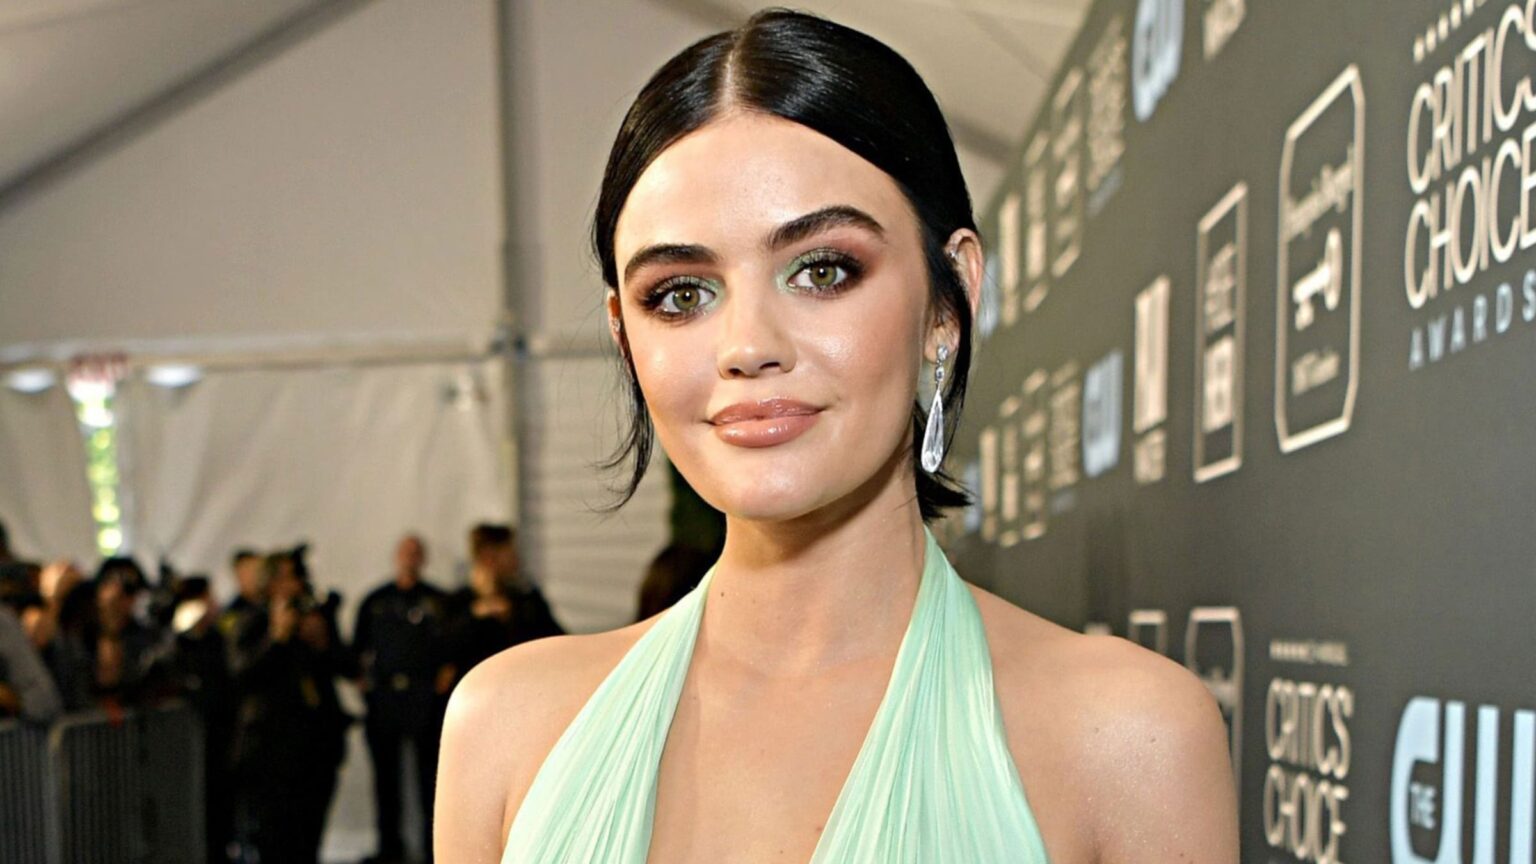 Starring in 'Pretty Little Liars' for nearly seven years perhaps can take a toll on anyone. See what Lucy Hale has to say about her time on the hit series.